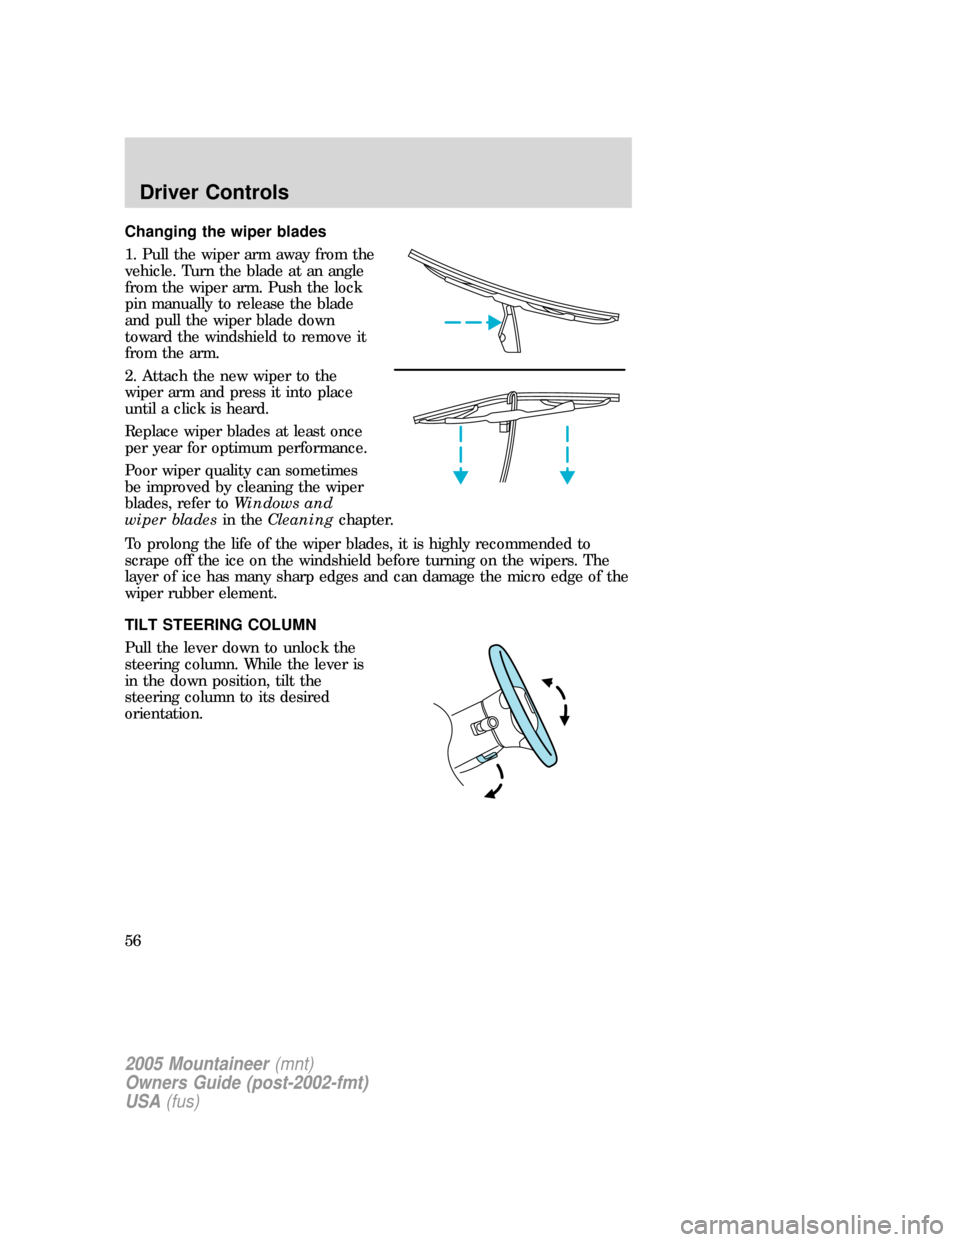 Mercury Mountaineer 2005  Owners Manuals Changing the wiper blades
1. Pull the wiper arm away from the
vehicle. Turn the blade at an angle
from the wiper arm. Push the lock
pin manually to release the blade
and pull the wiper blade down
towa